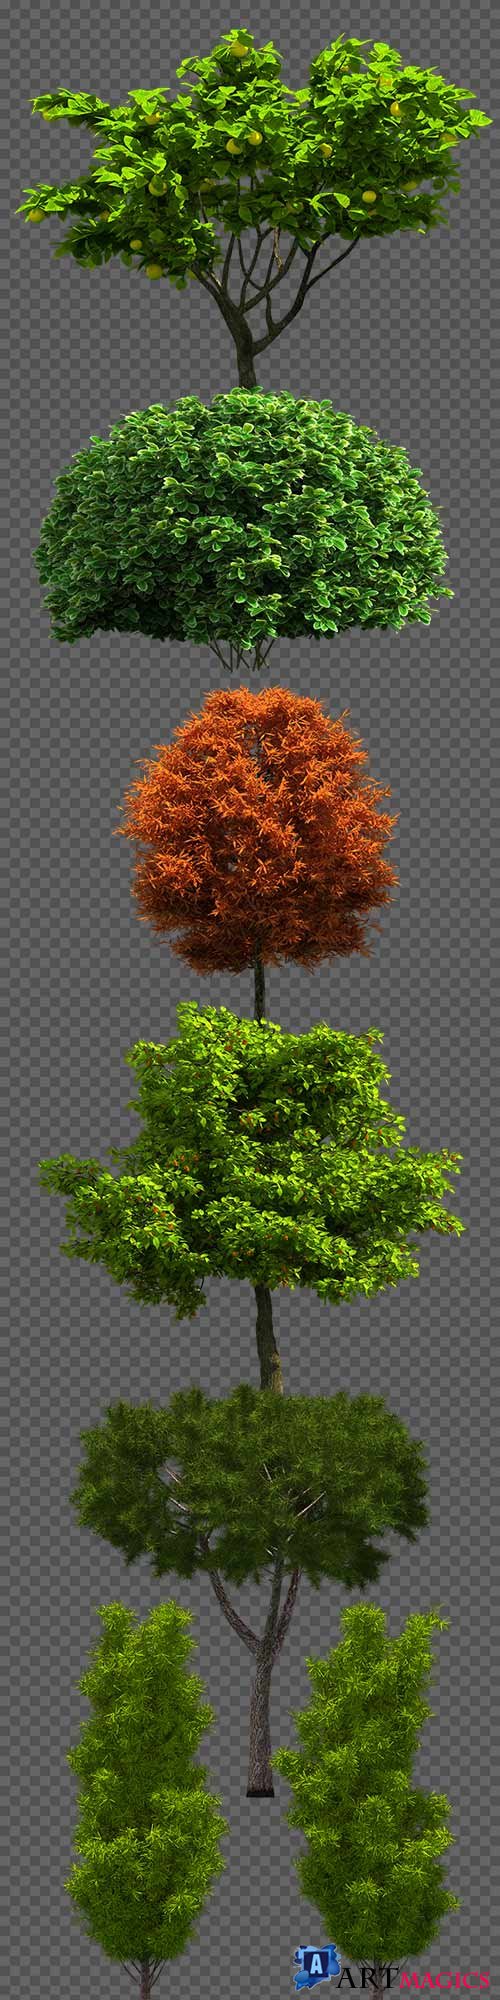 Trees on a transparent background PNG - 7